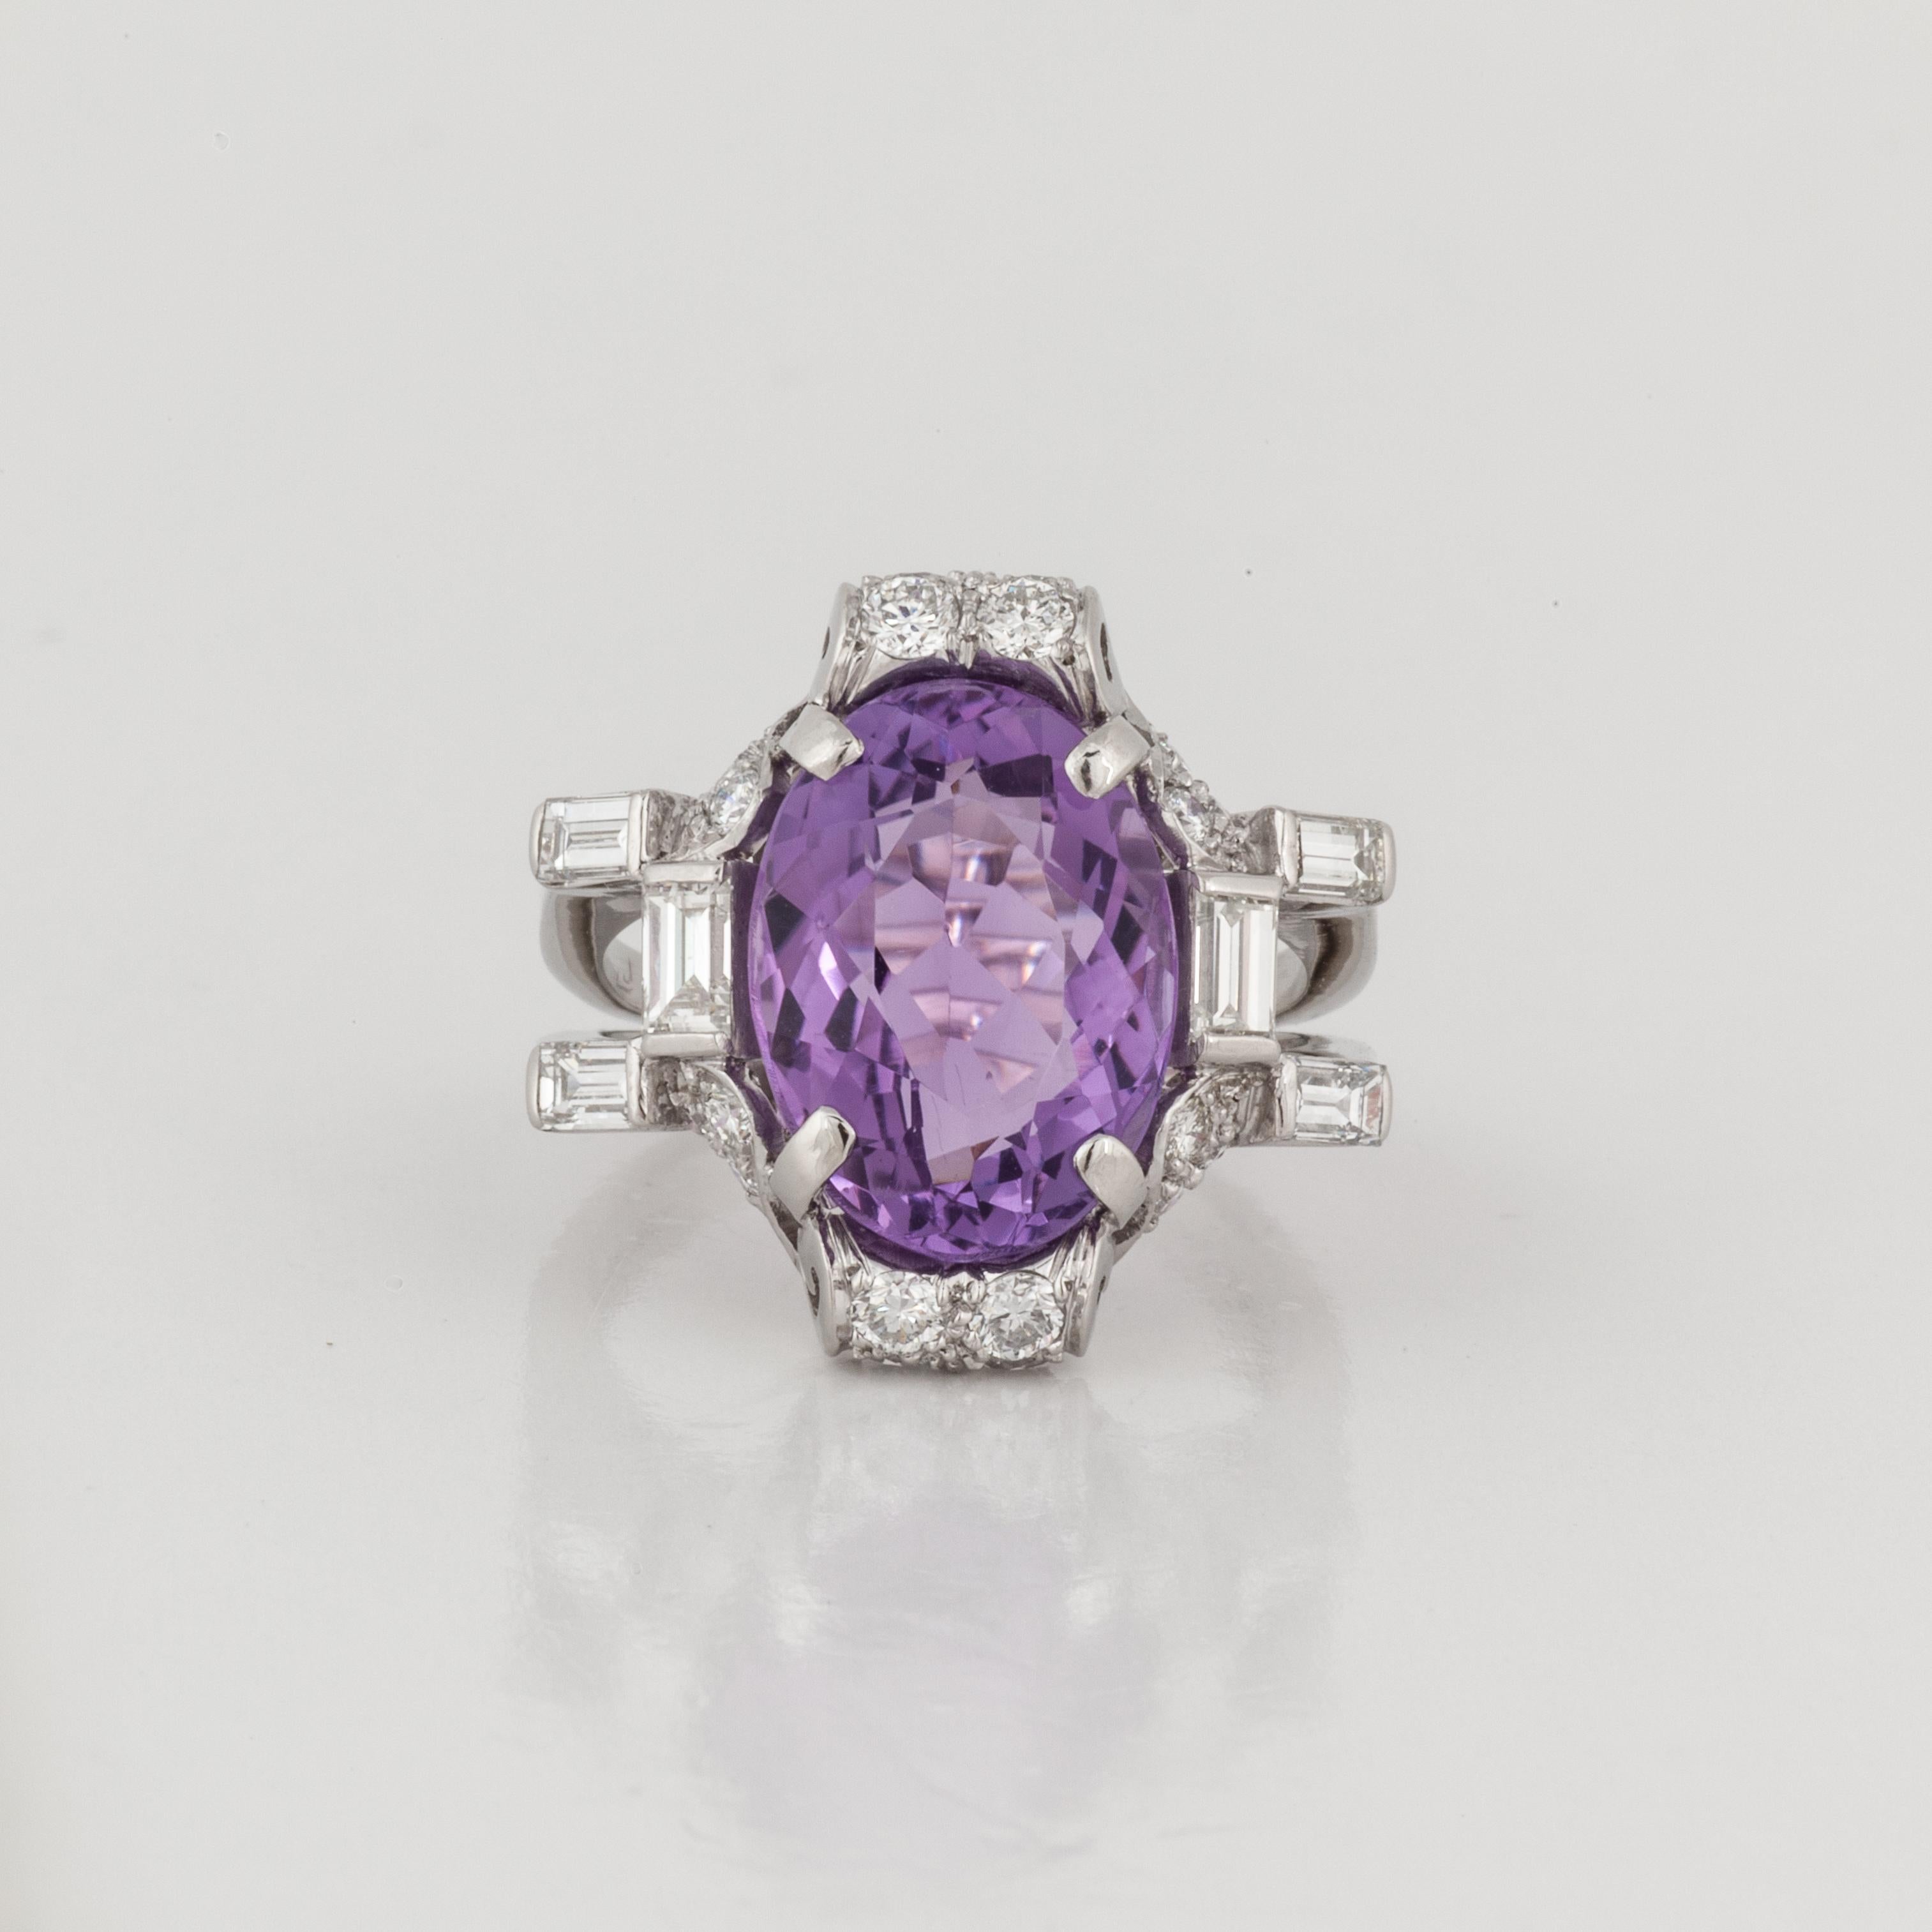 Platinum ring featuring an oval amethyst accented by round and baguette diamonds.  The amethyst weighs 7 carats.  Surrounding the amethyst 20 round diamonds totaling 0.65 carats and six baguette diamonds that total 0.60 carats, H-I color and VS